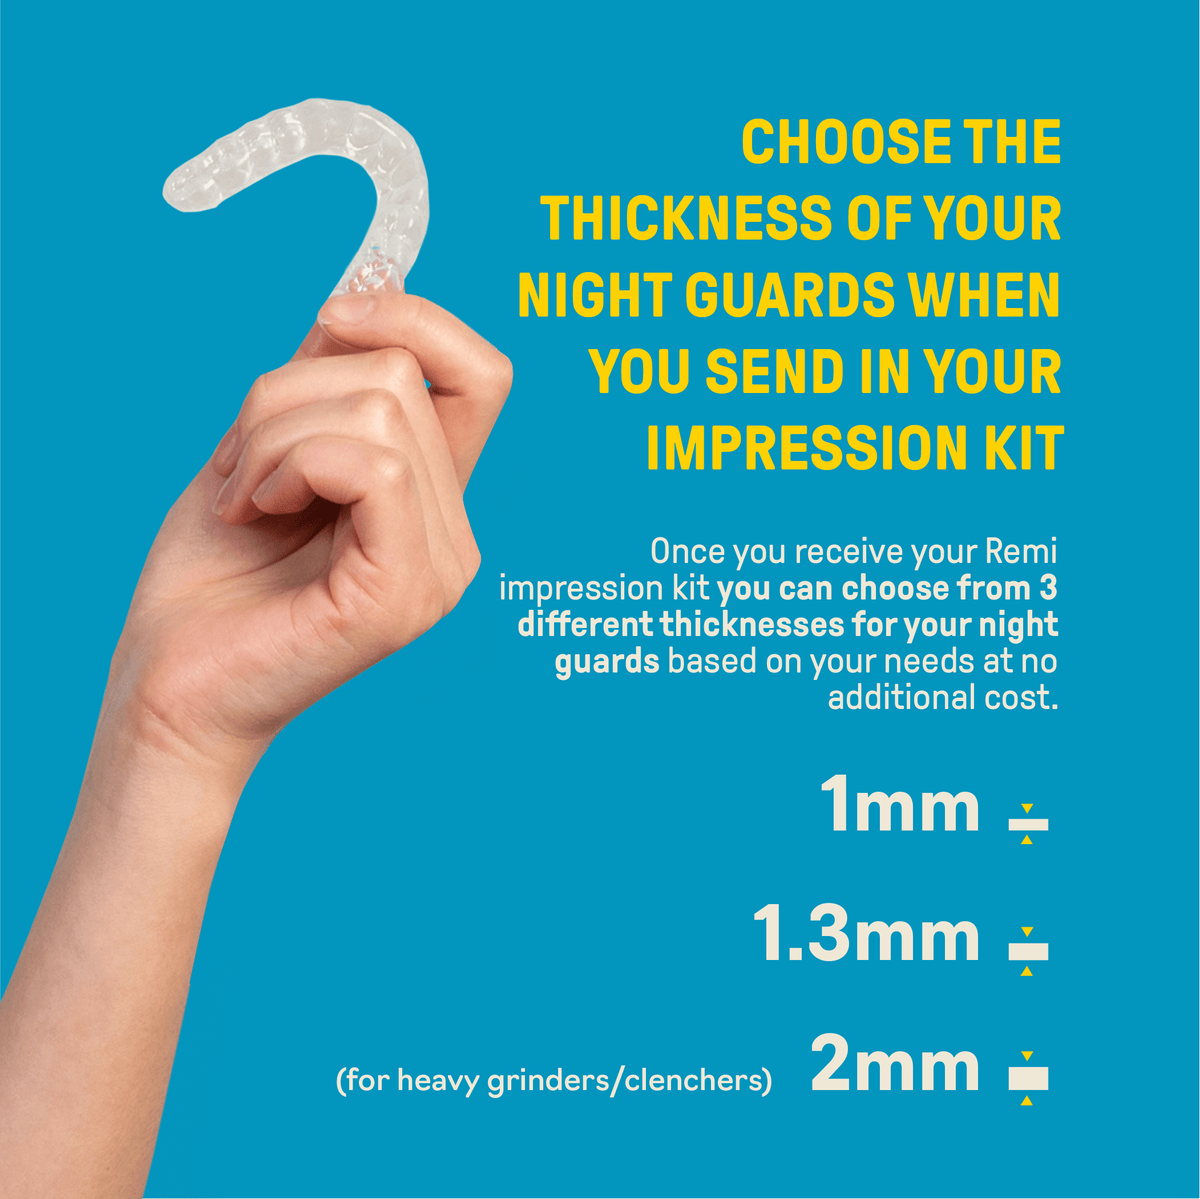 Promotional graphic featuring a transparent question mark, text about choosing the thickness of Custom Night Guards from an impression kit, and three thickness options: 1mm, 1.3mm.